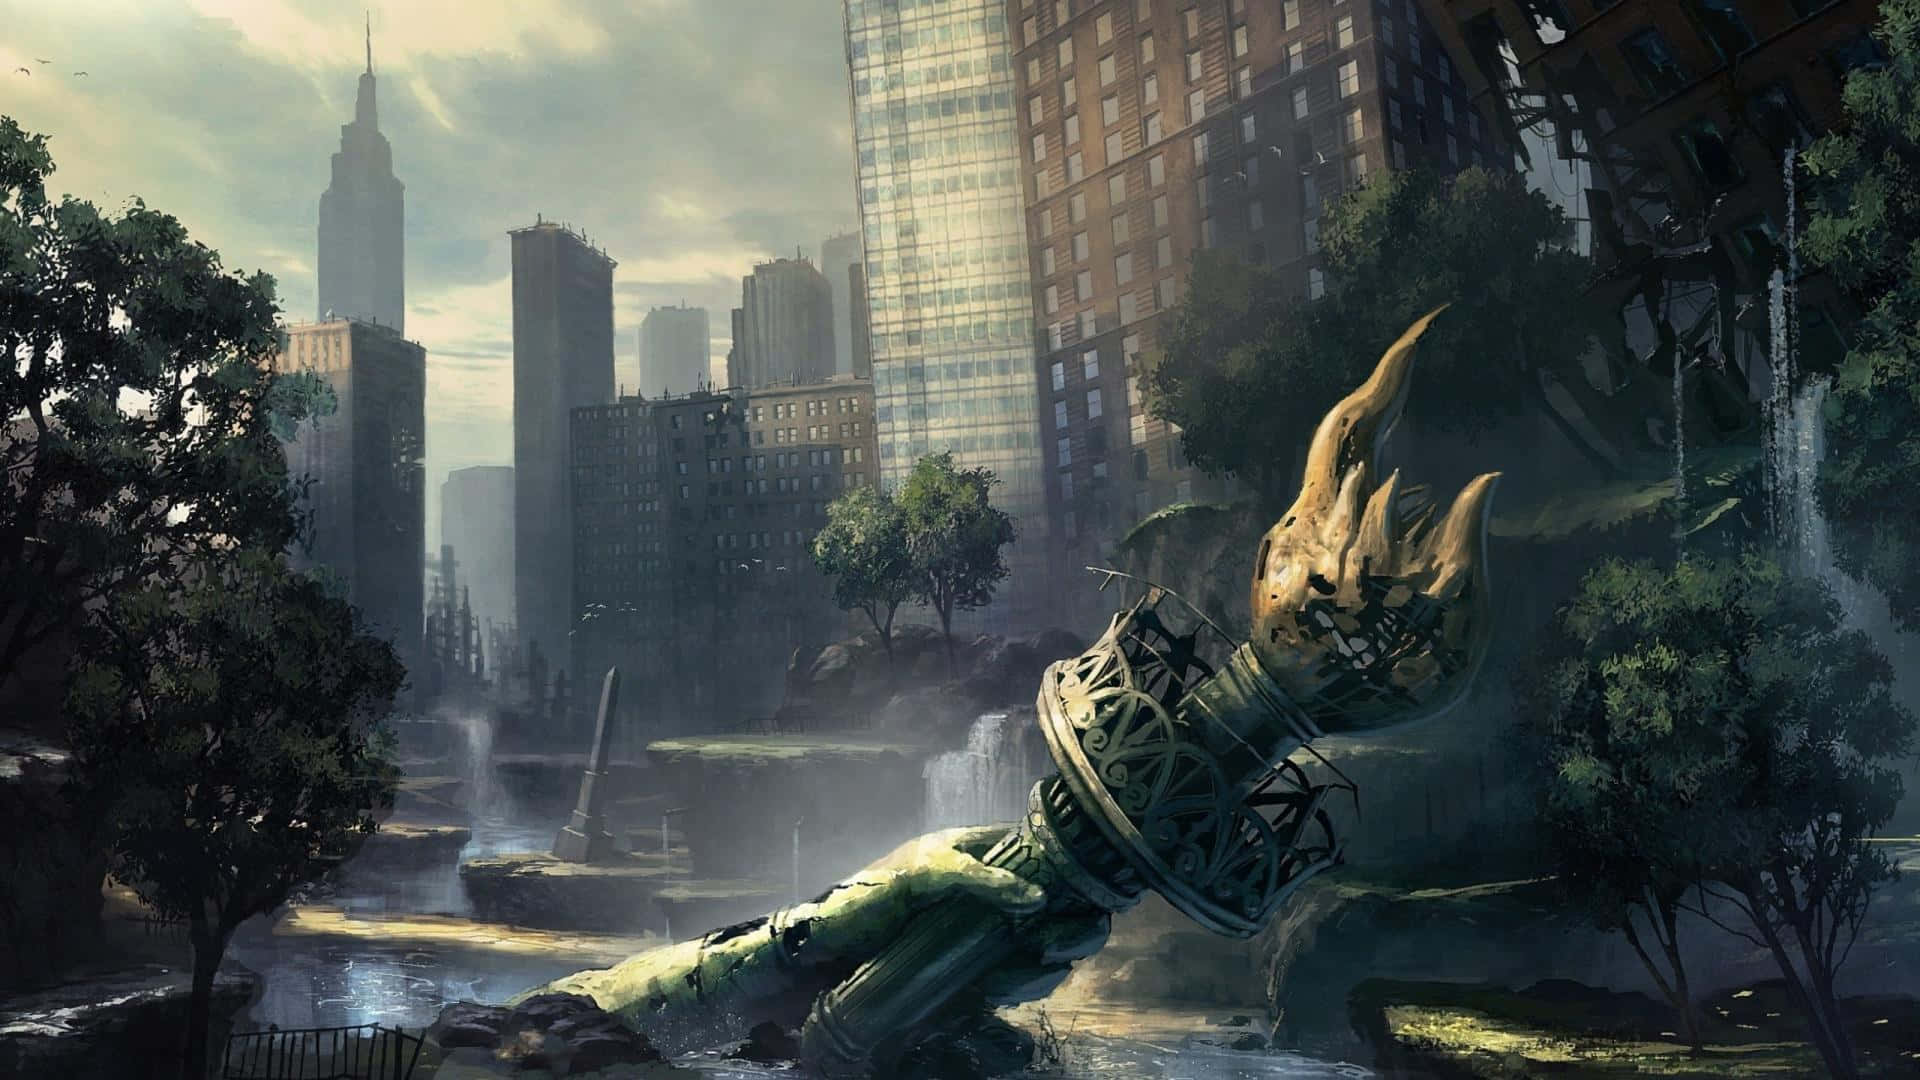 "A view of an exotic city in the hit game Crysis 3". Wallpaper